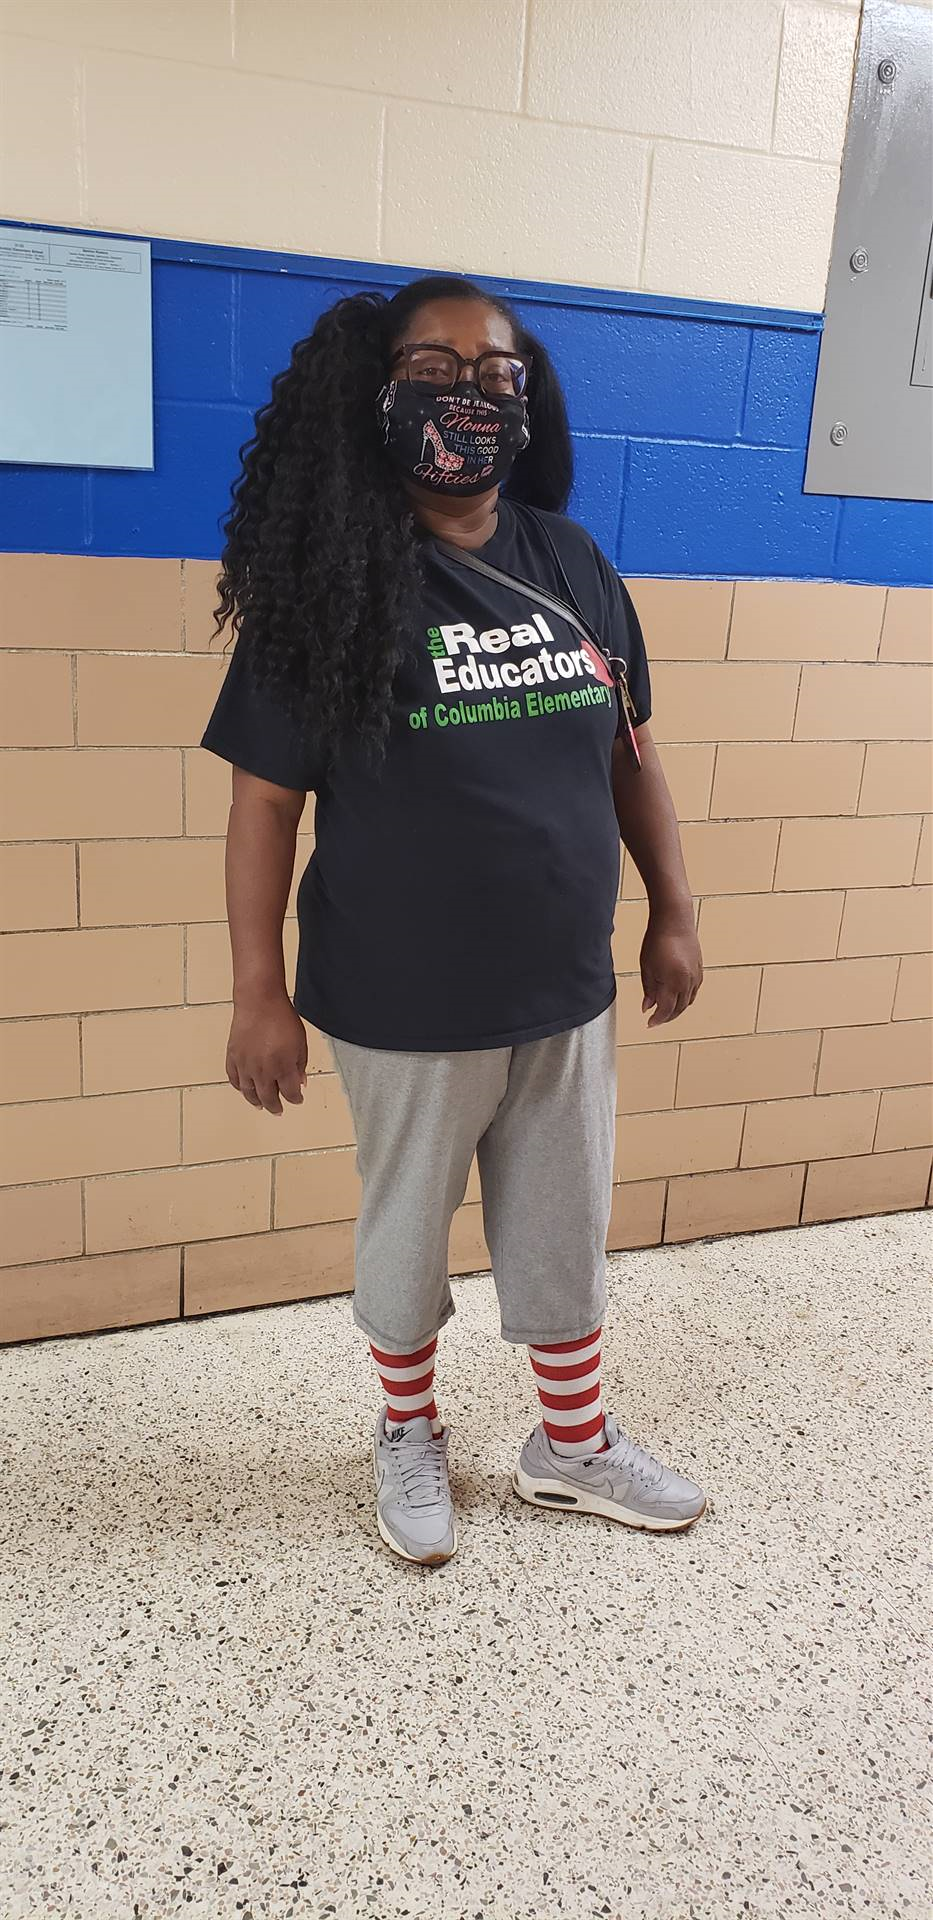 Drugfree Week Crazy Hair and Socks Day